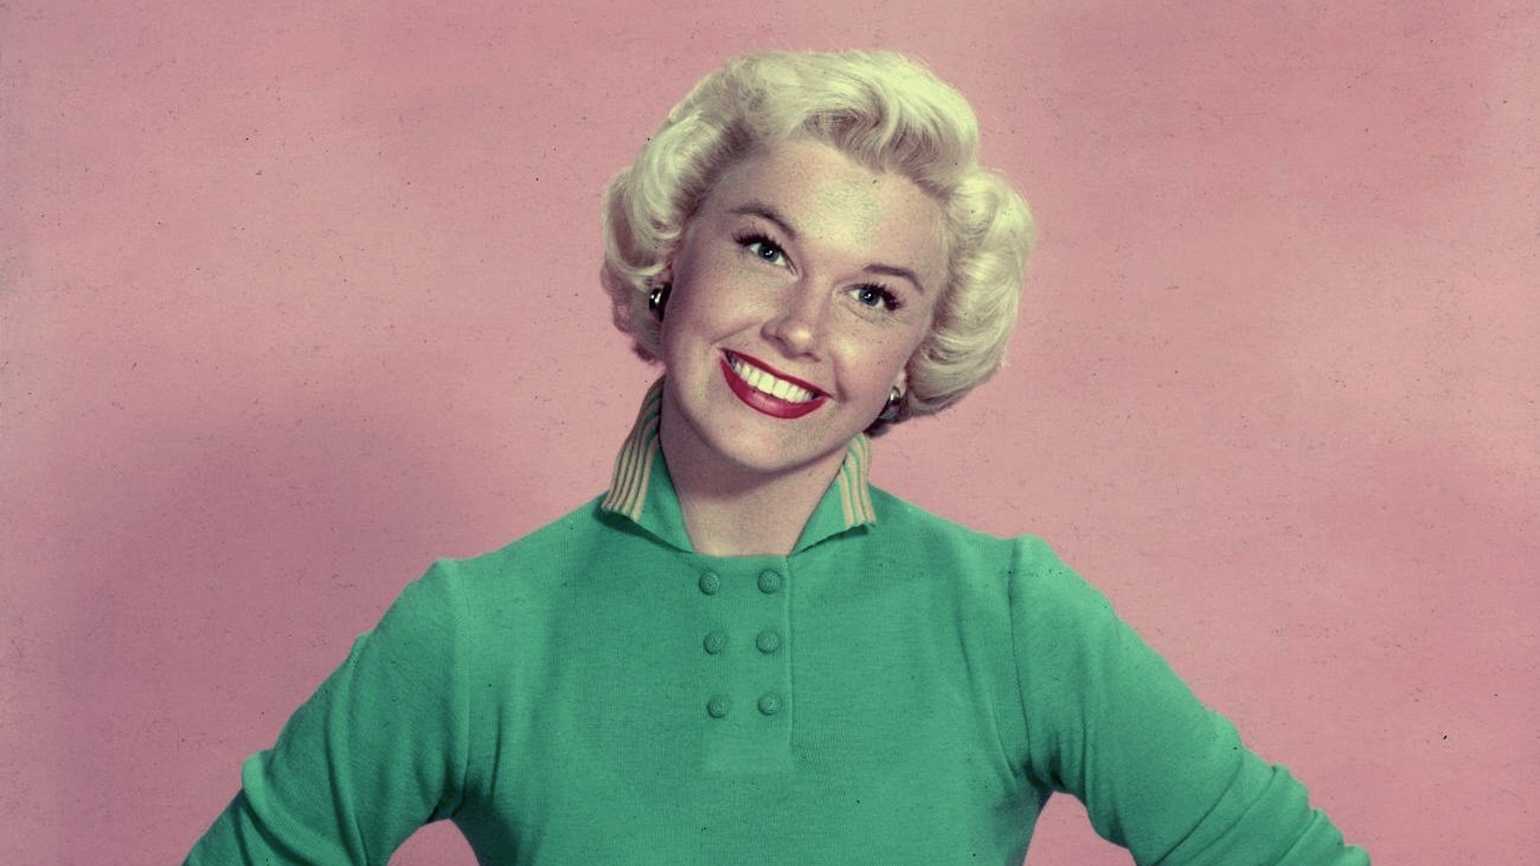 Hollywood icon, Doris Day, has passed away at the age of 97